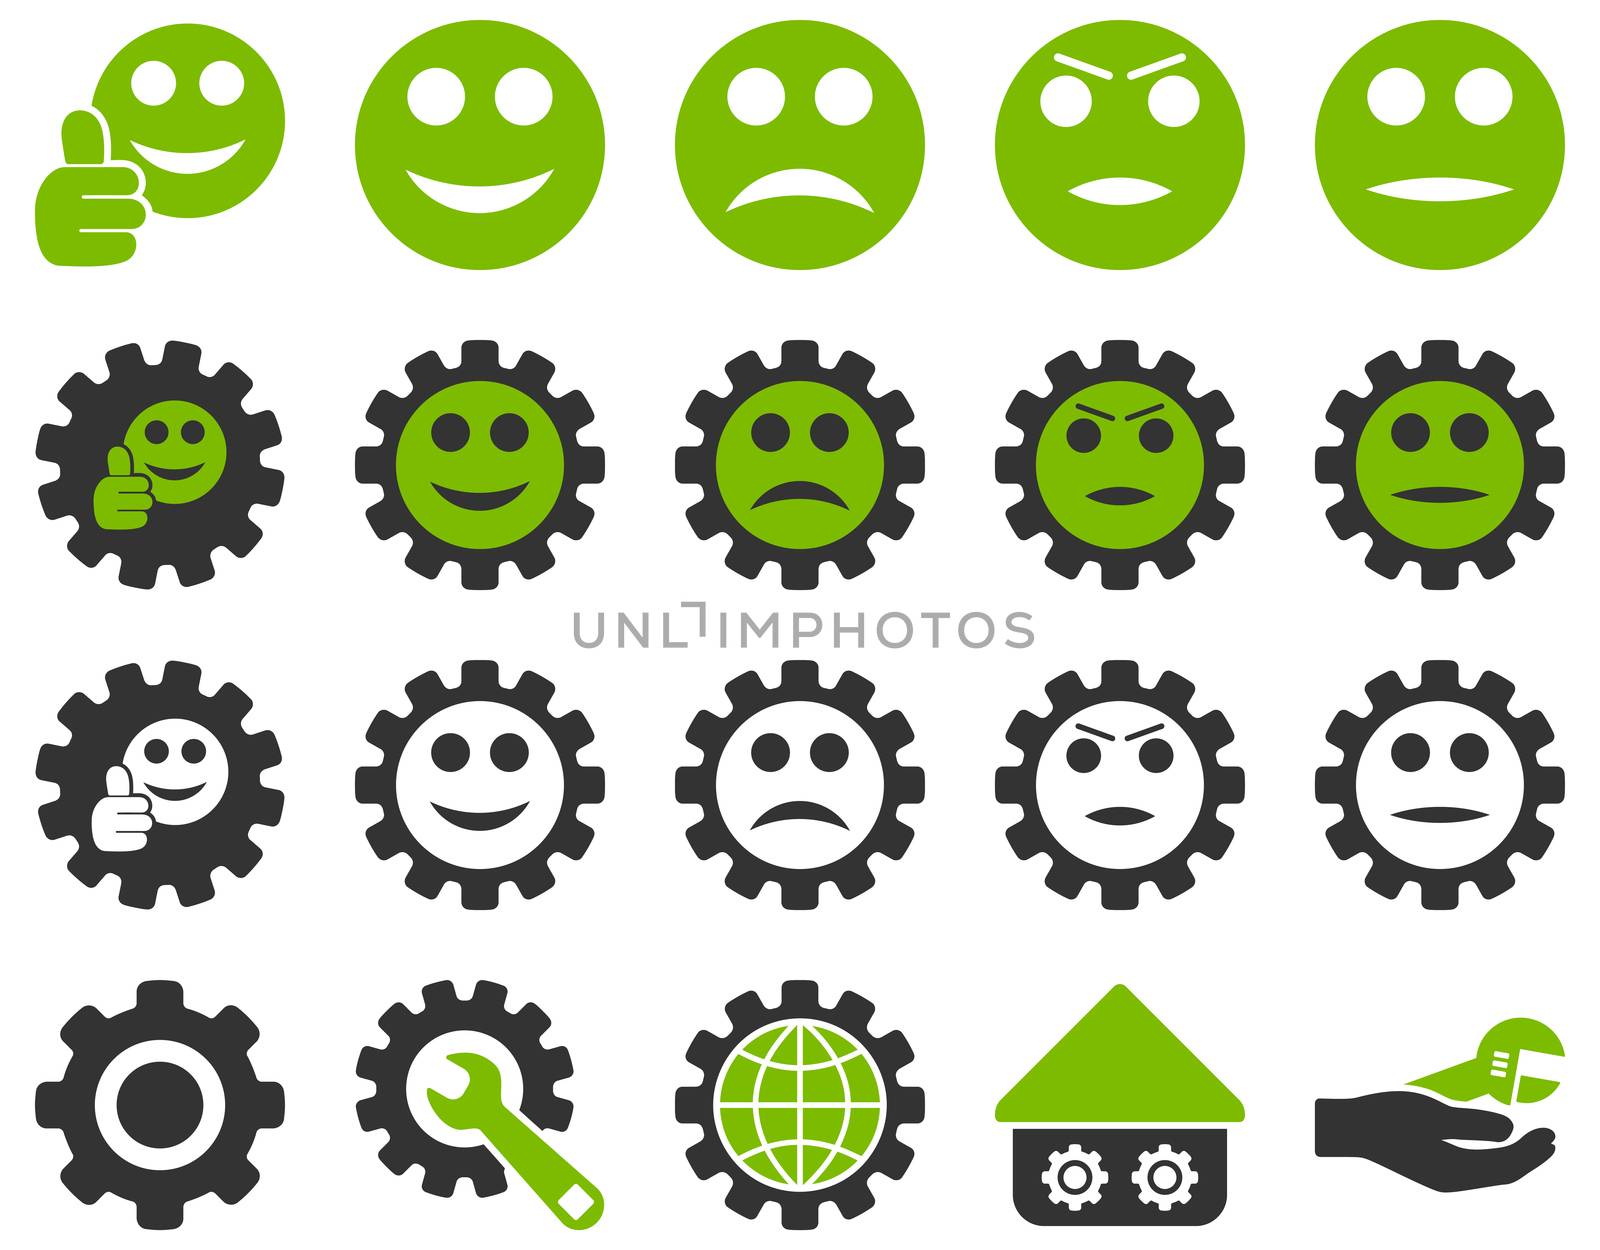 Settings and Smile Gears Icons. Icon set style is bicolor flat images, eco green and gray colors, isolated on a white background.